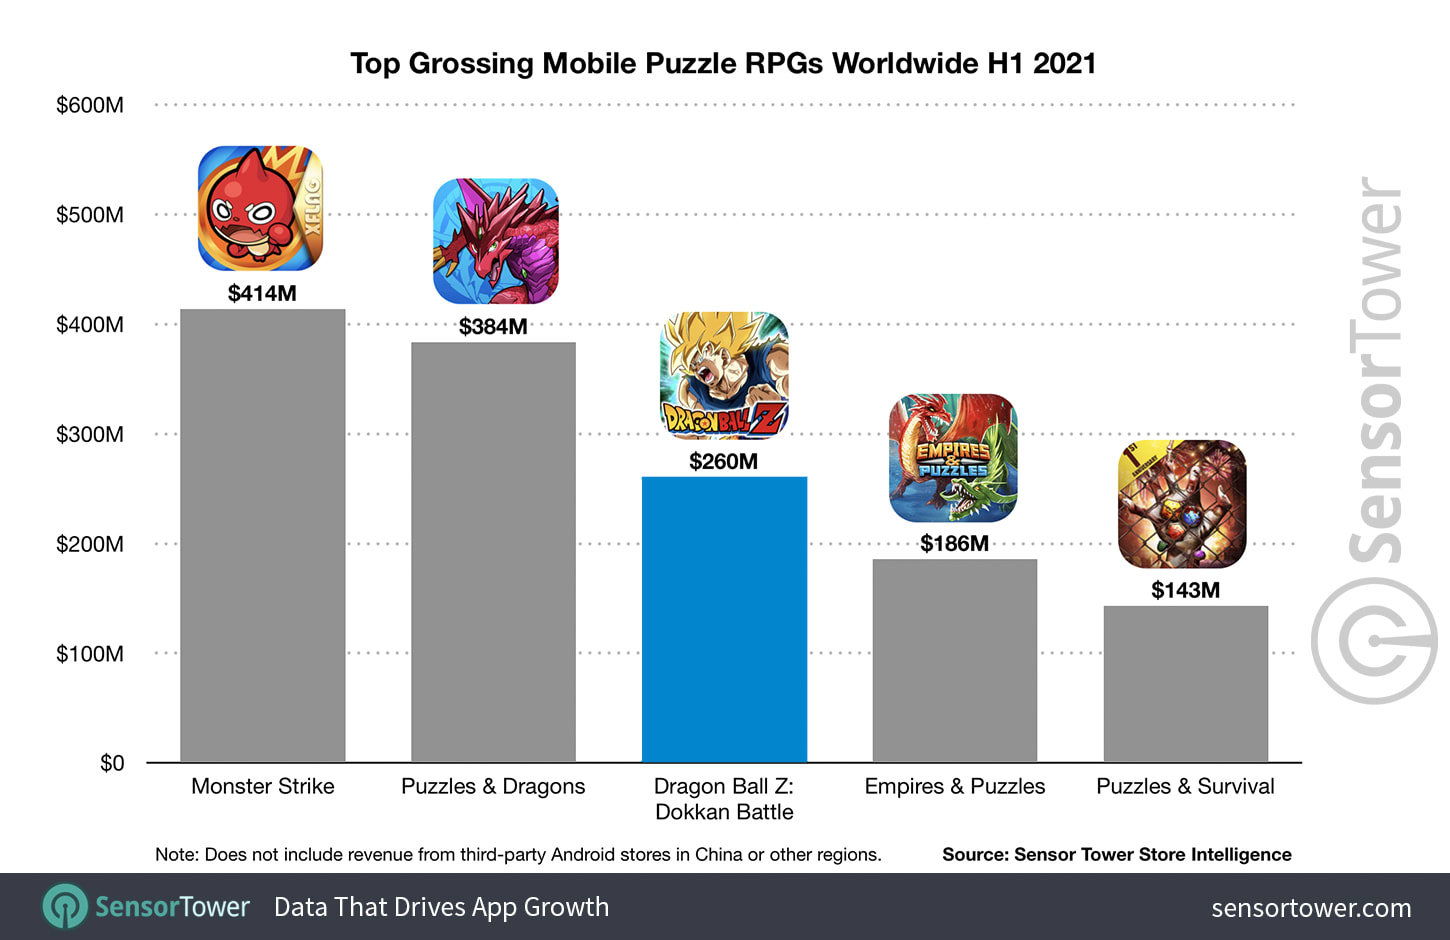 Top grossing puzzle rpg